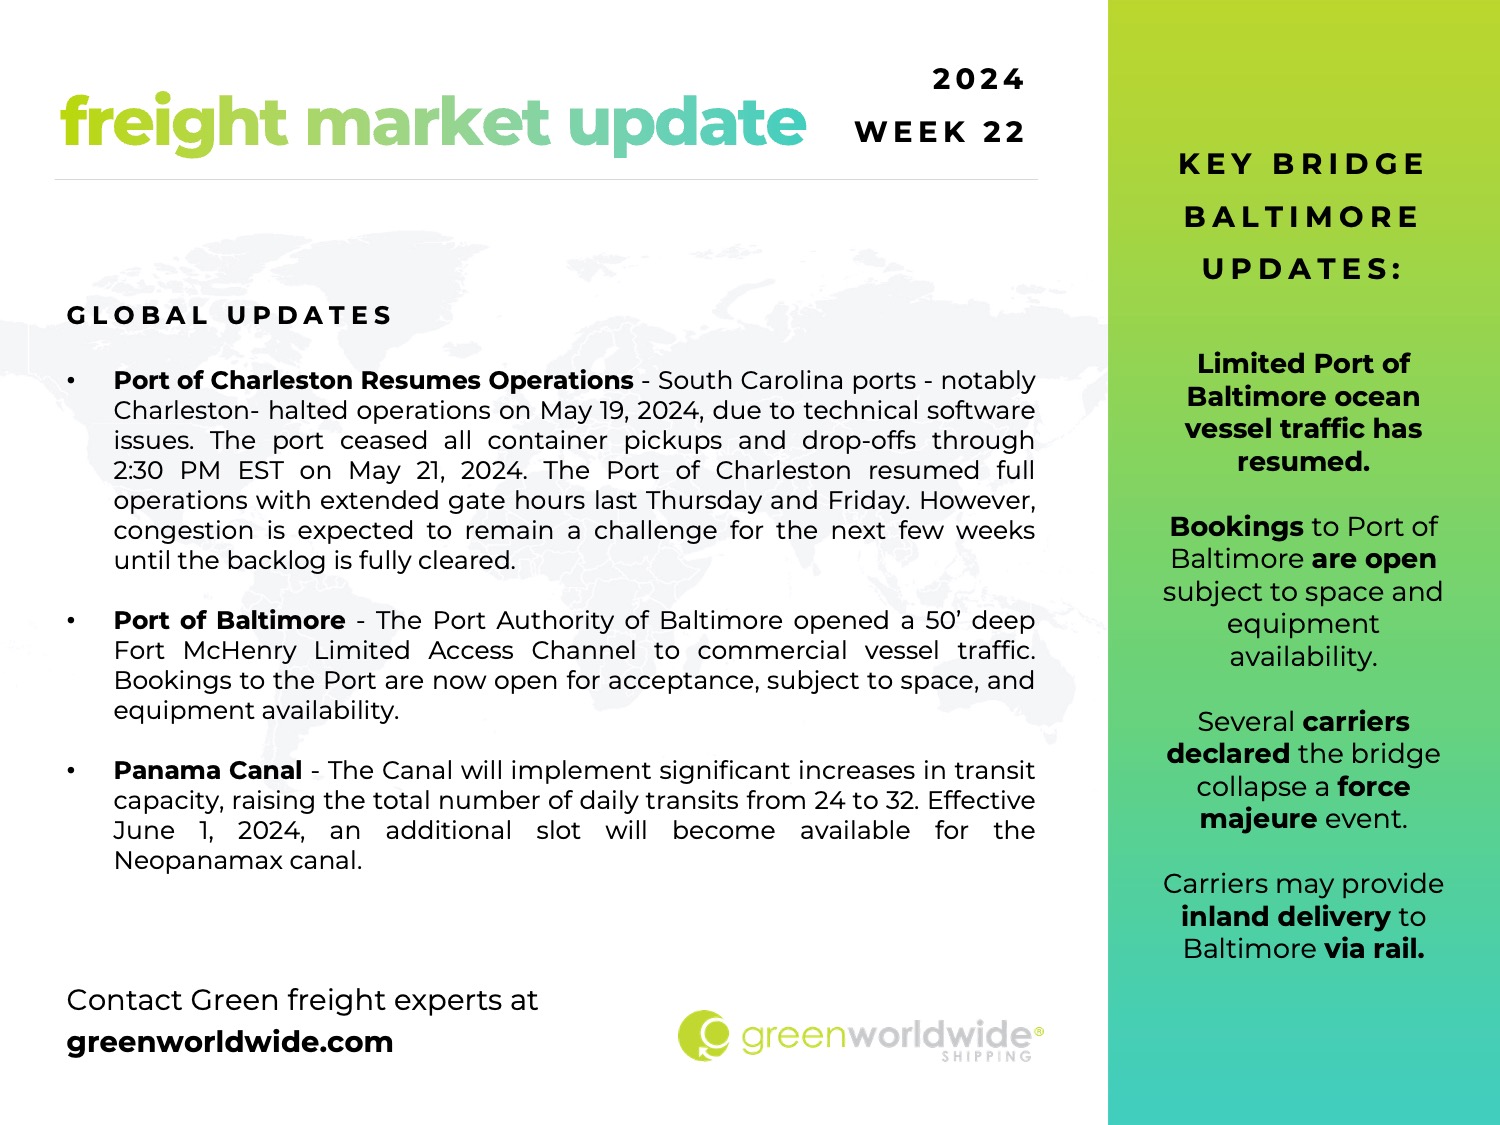 freight market update, week 22, port congestion, port of baltimore, panama canal, port of charleston